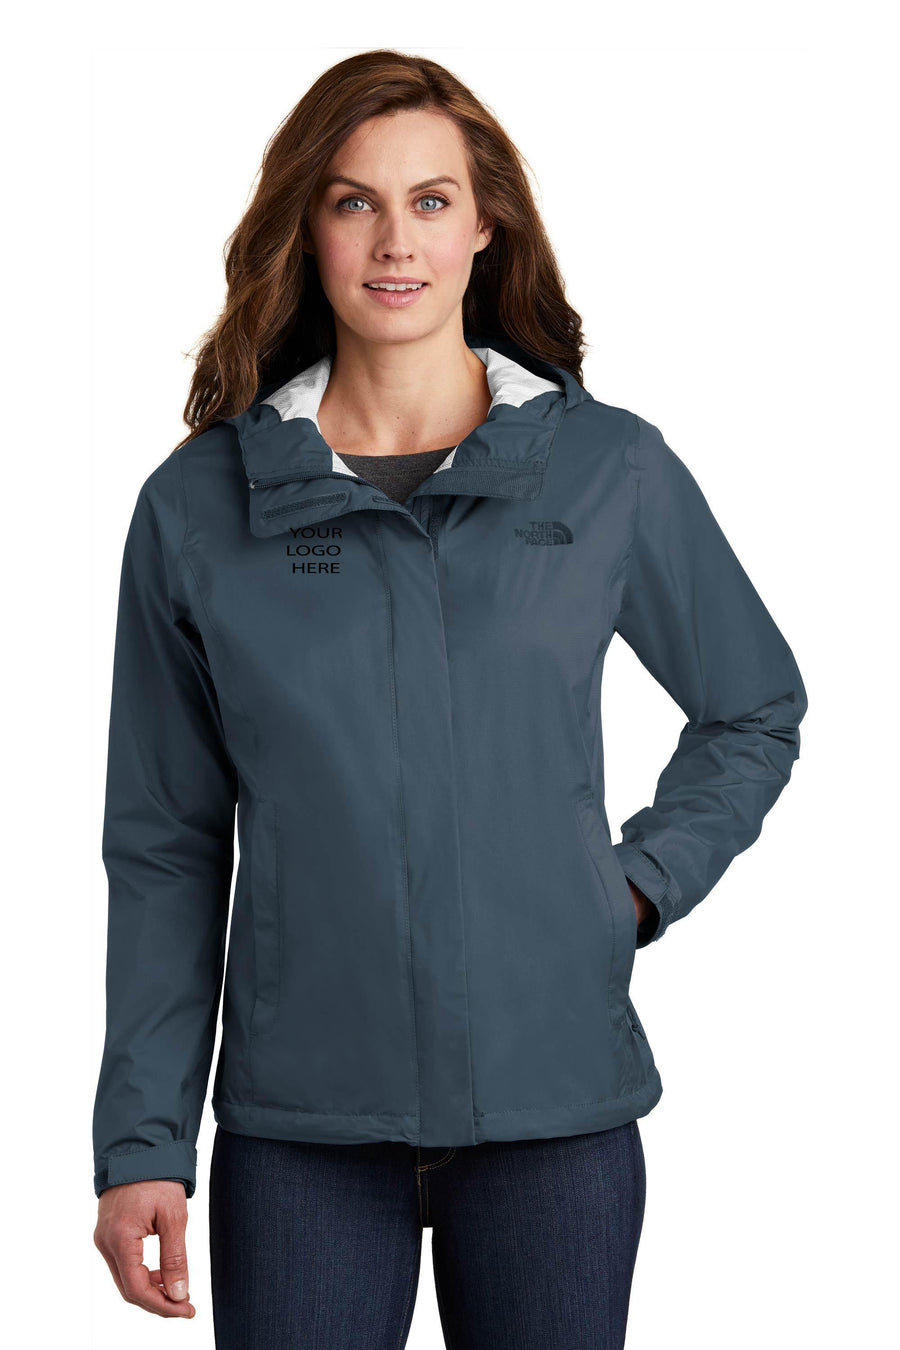 Keller Williams KW-SMNF0A3LH5 North Face® Ladies DryVent™ Rain Jacket 